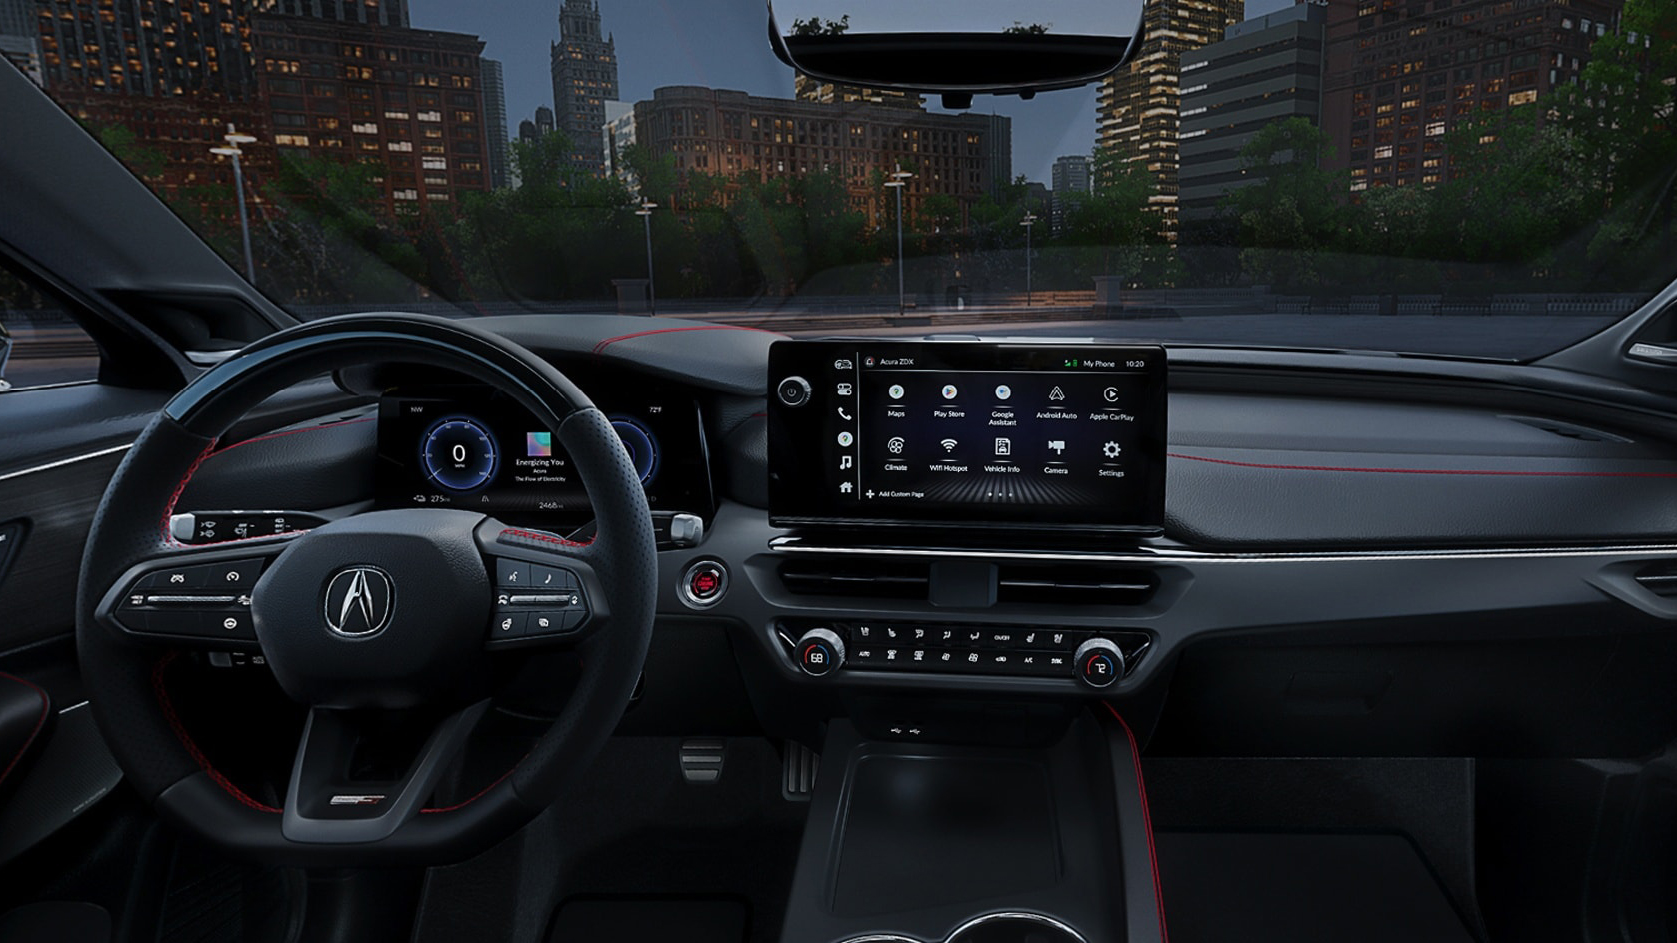 Internal marketing photograph of the Acura ZDX SUV.  The interior of the electric vehicle shows the central screen, steering wheel and other dashboard functions.